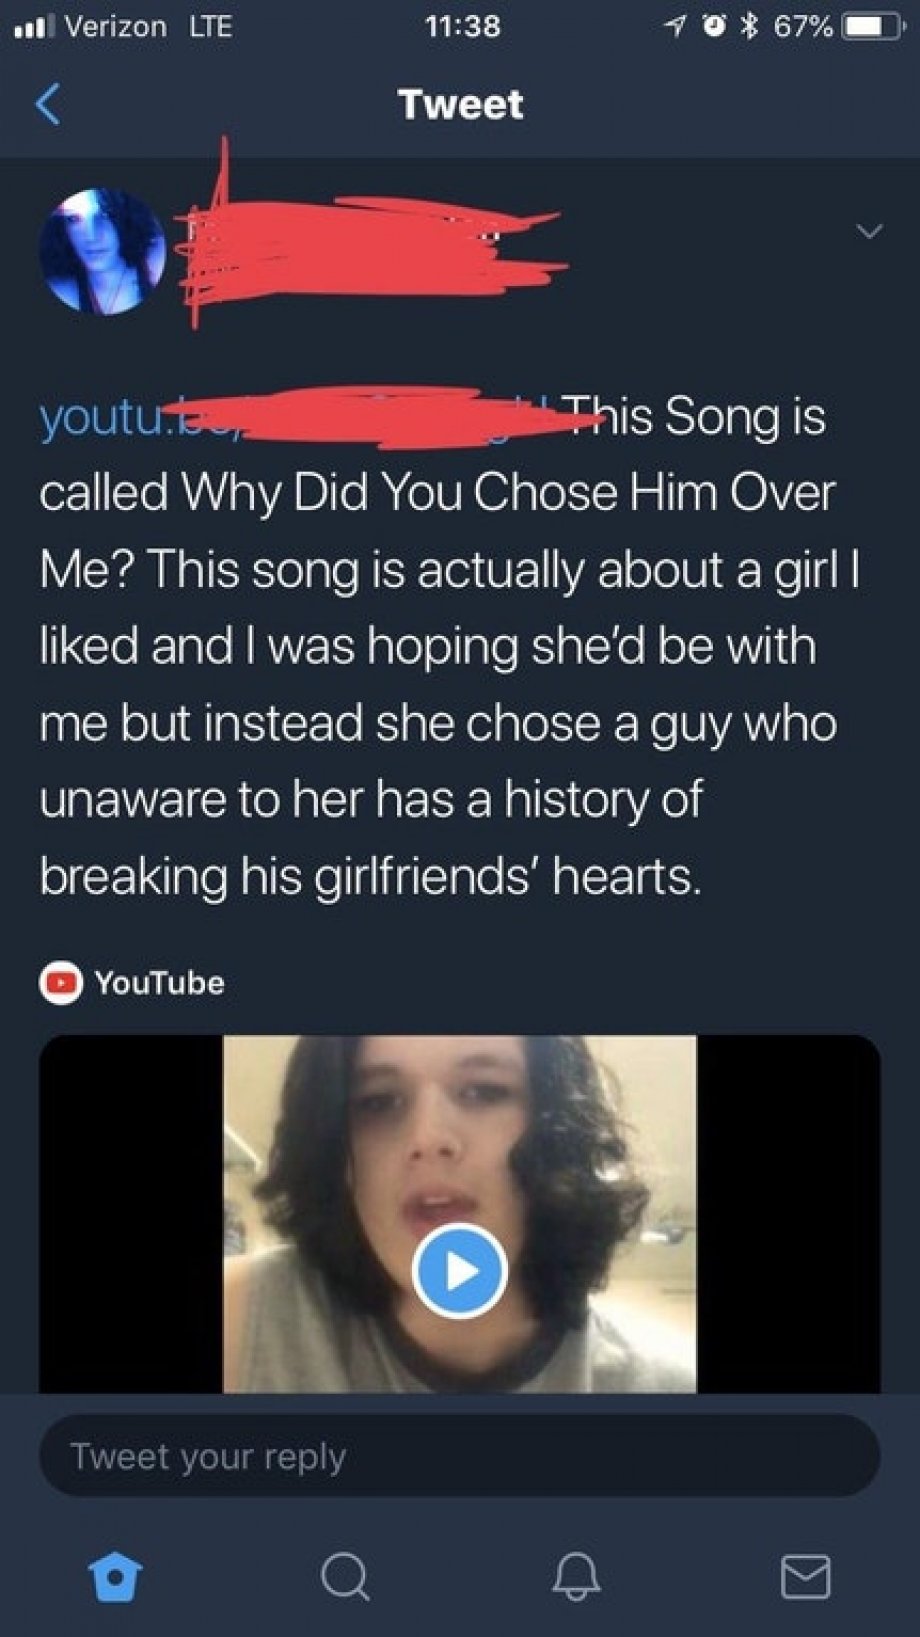 she chose him over me - 11 Verizon Lte 10% 67% Tweet youtu.com This Song is called Why Did You Chose Him Over Me? This song is actually about a girl I d and I was hoping she'd be with me but instead she chose a guy who unaware to her has a history of brea